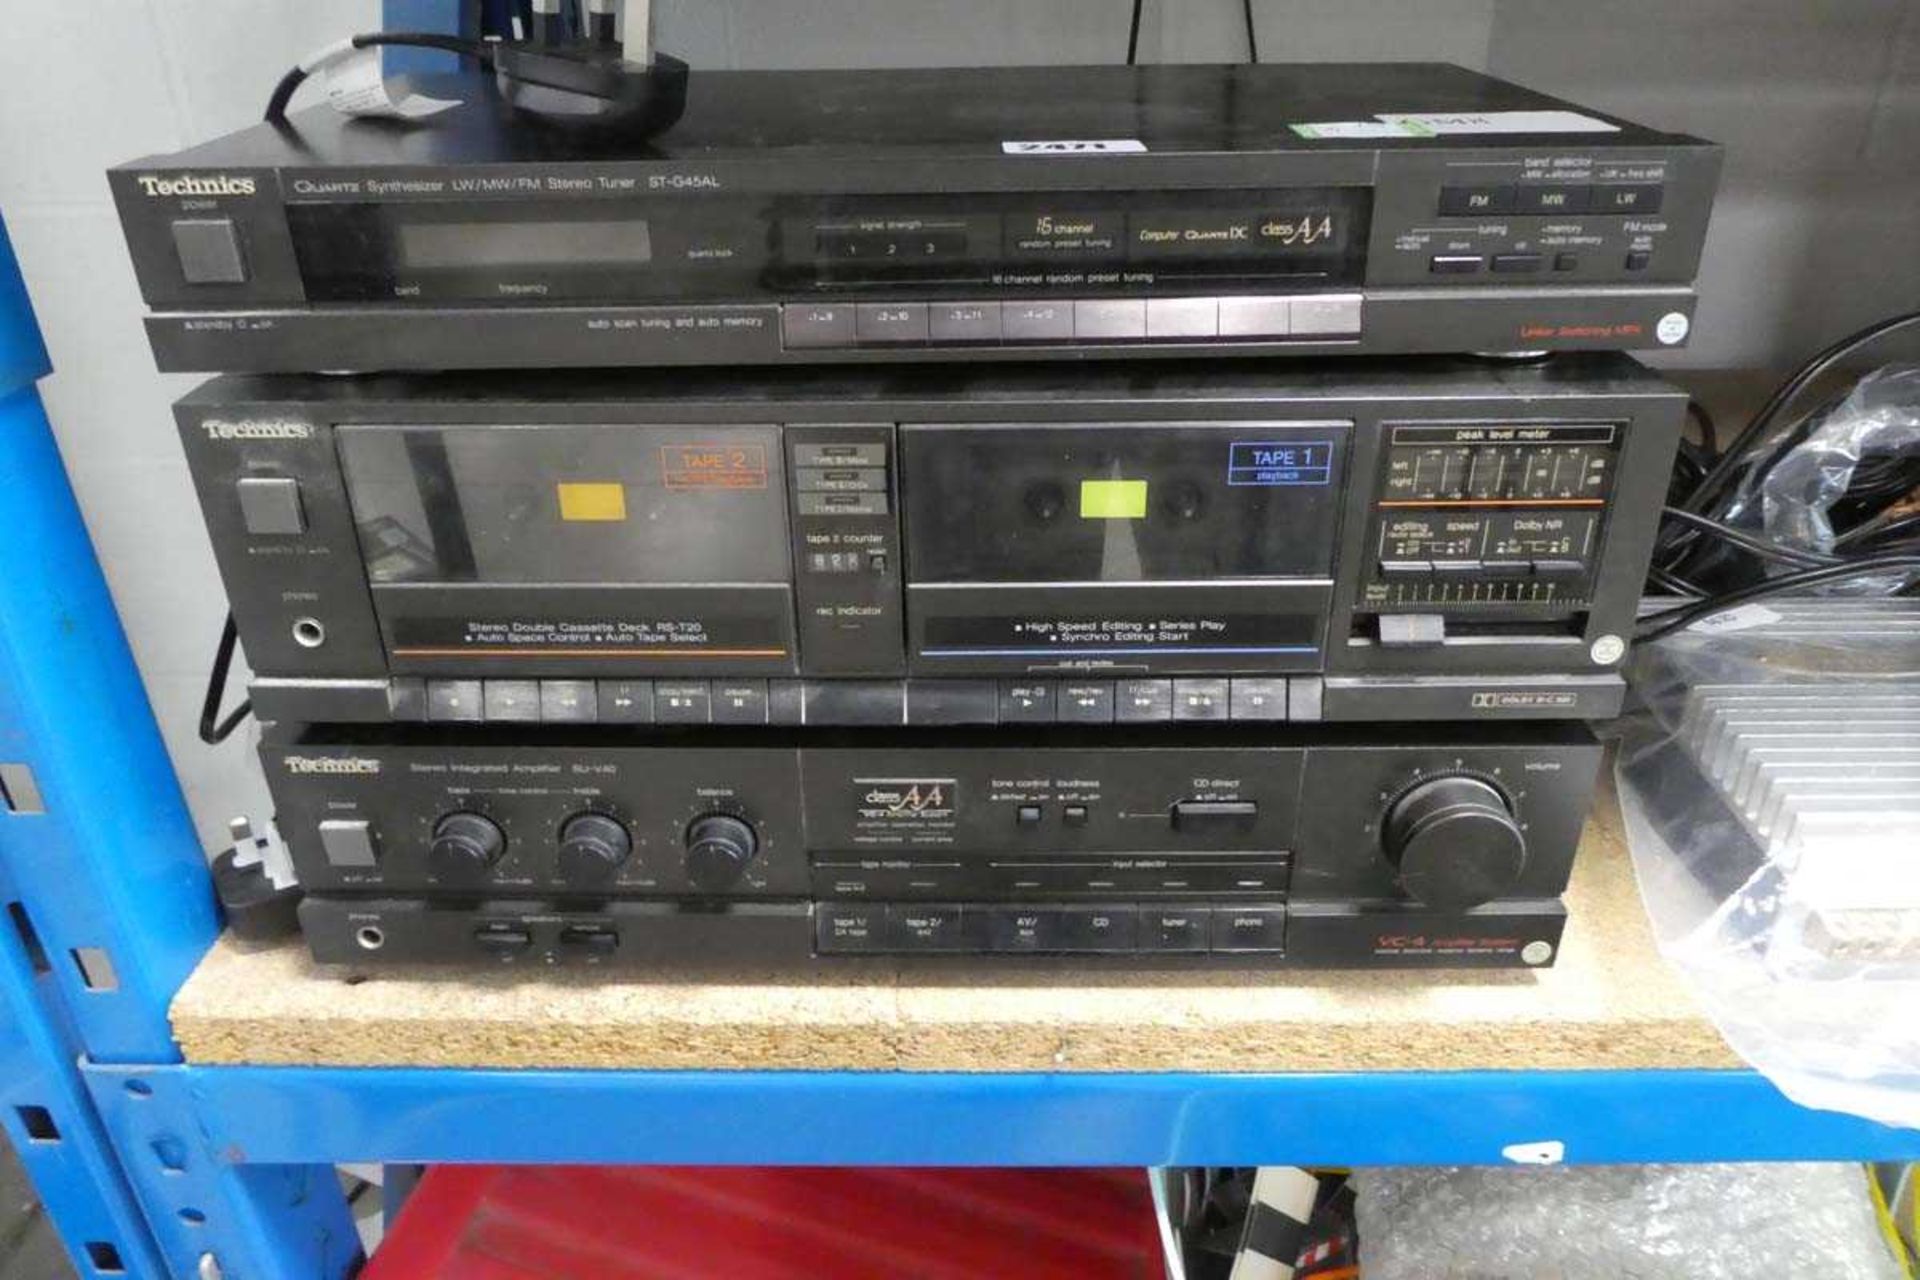 Technics hifi system with stereo tuner, tape deck and amplifier